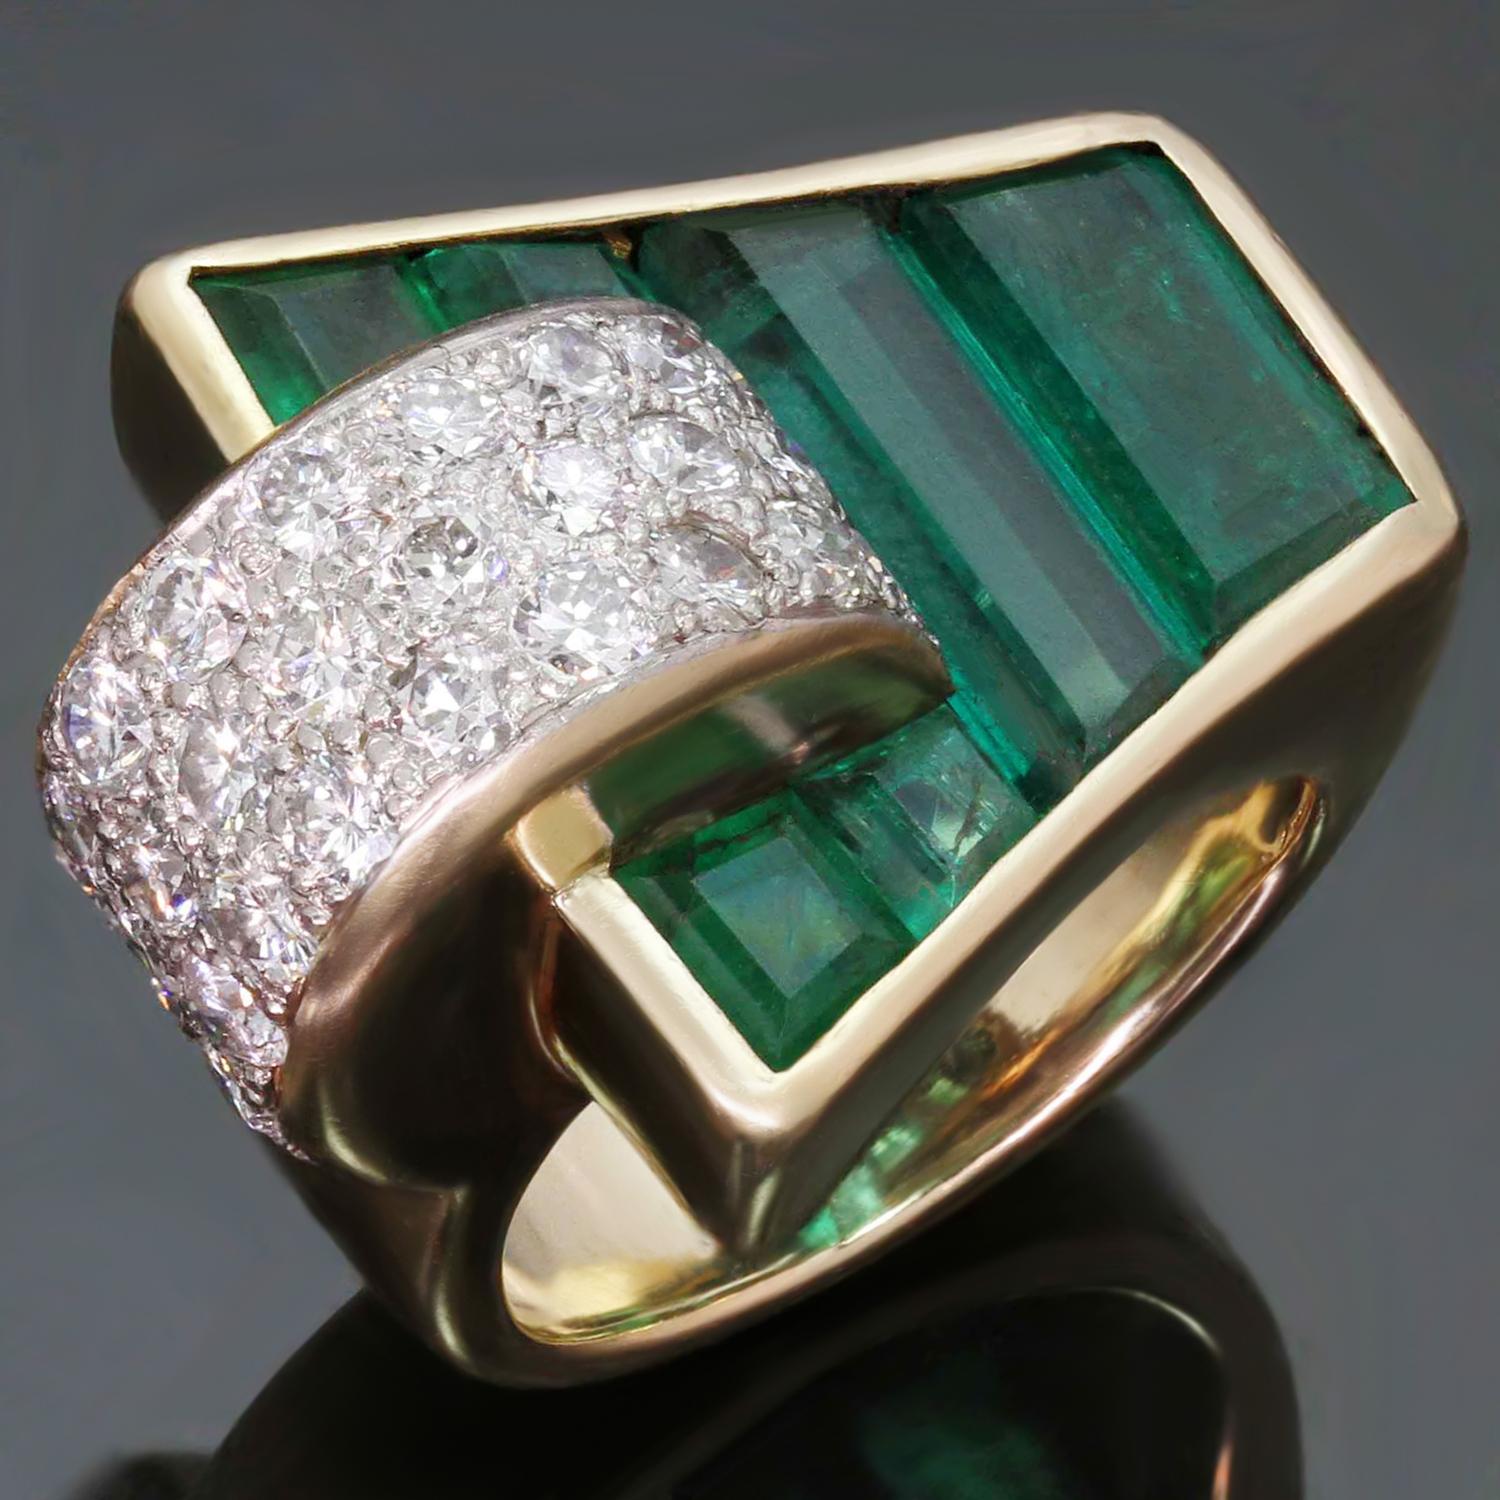 This rare and gorgeous antique Trabert & Hoeffer Mauboussin ring is crafted in 14k yellow gold and set with Colombian emeralds measuring an estimated 18mm x 23mm and weighing an estimated 3.0-3.50 carats and 30 pave-set diamonds weighing an